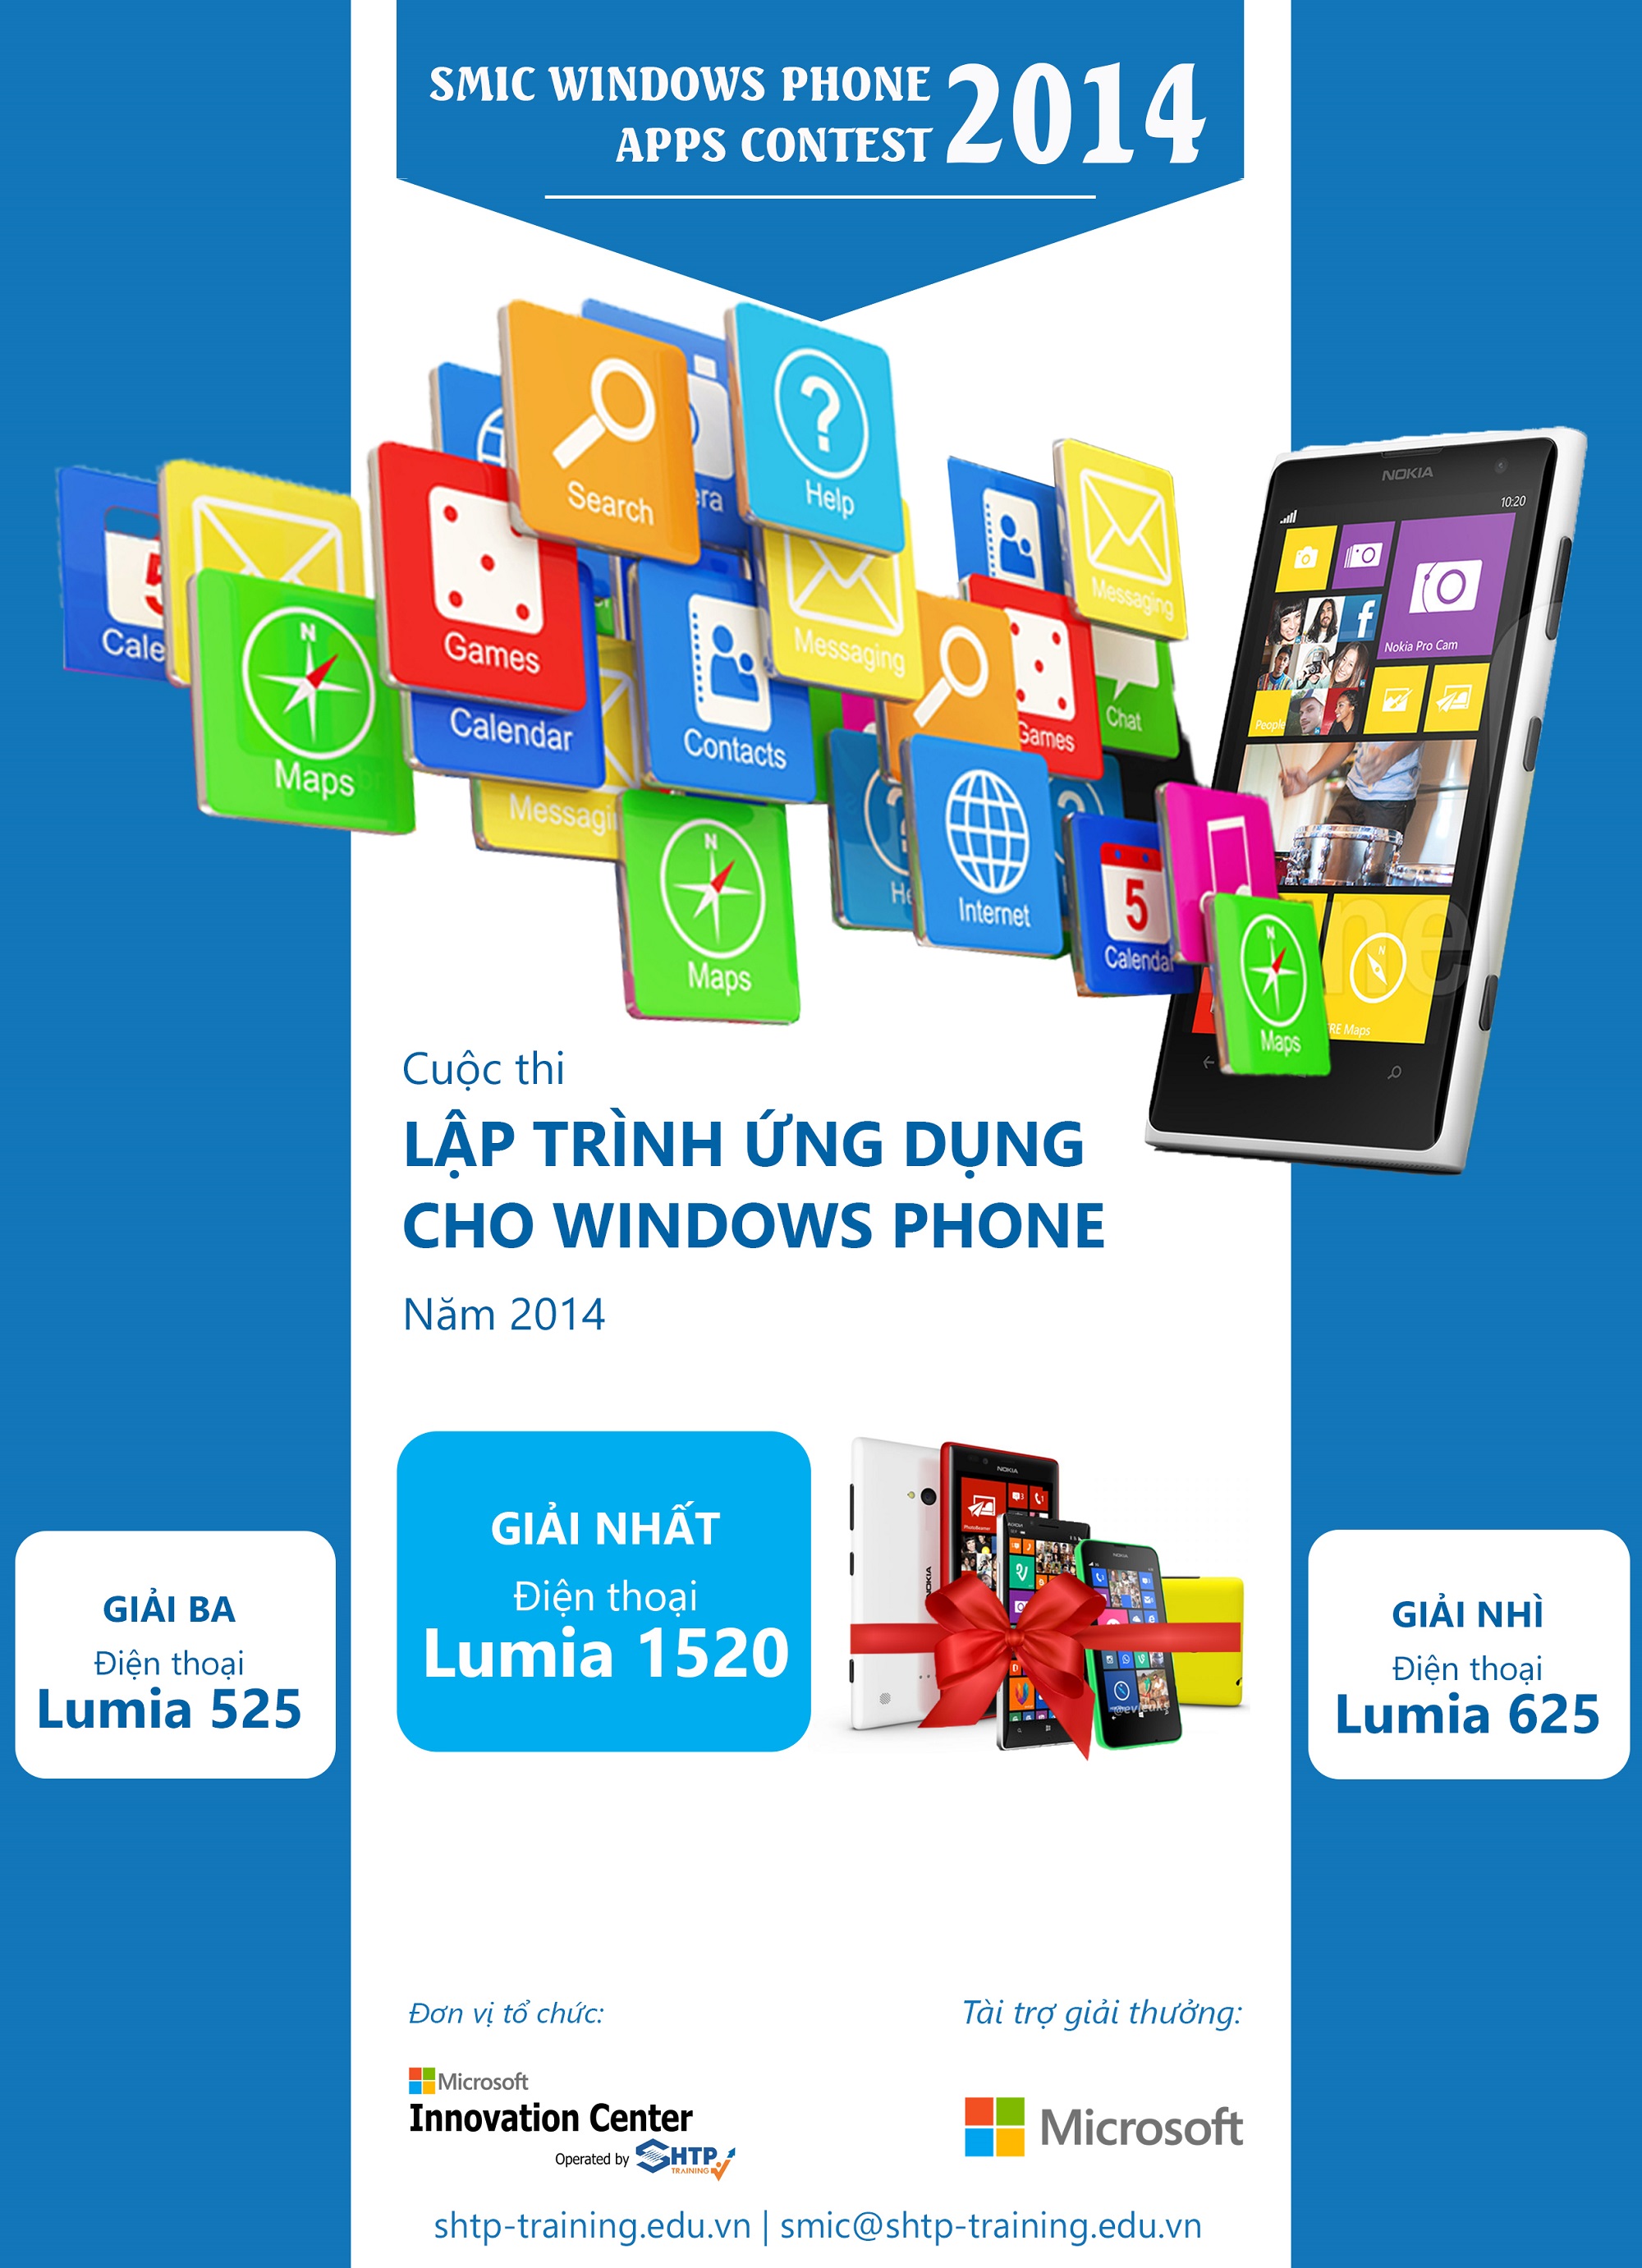 Announcement] SMIC Windows Phone Apps Contest 2014 - School of Computer  Science and Engineering